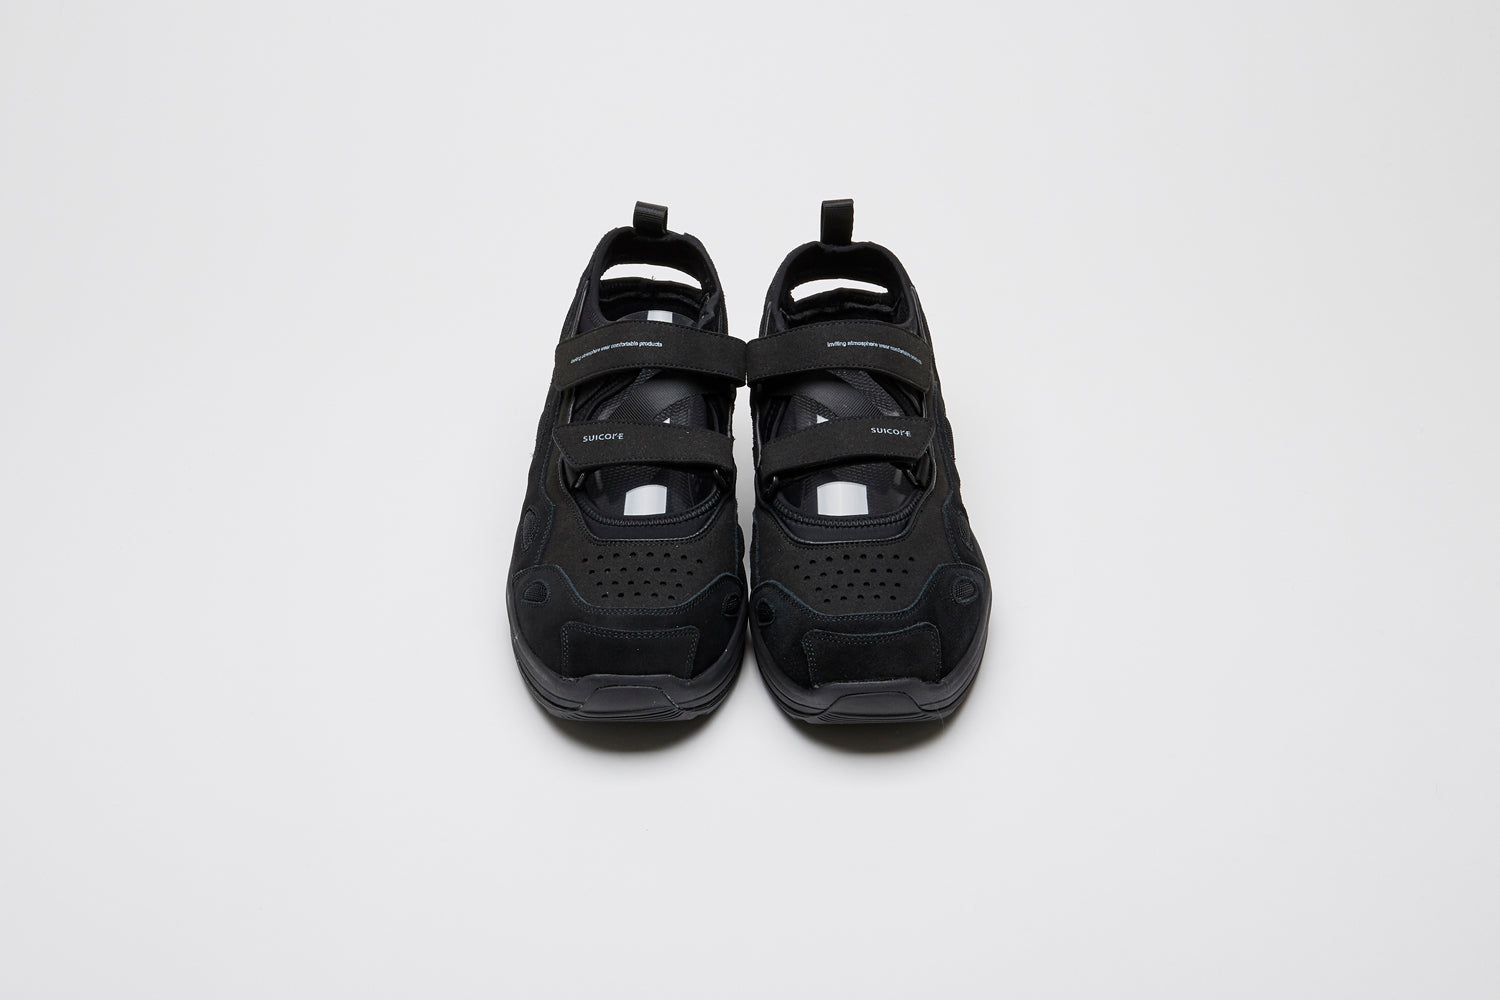 SUICOKE AKK-ab shoes with black cow suede and nylon upper, black midsole and sole, straps and logo patch. From Spring/Summer 2022 collection on SUICOKE Official US &amp; Canada Webstore.